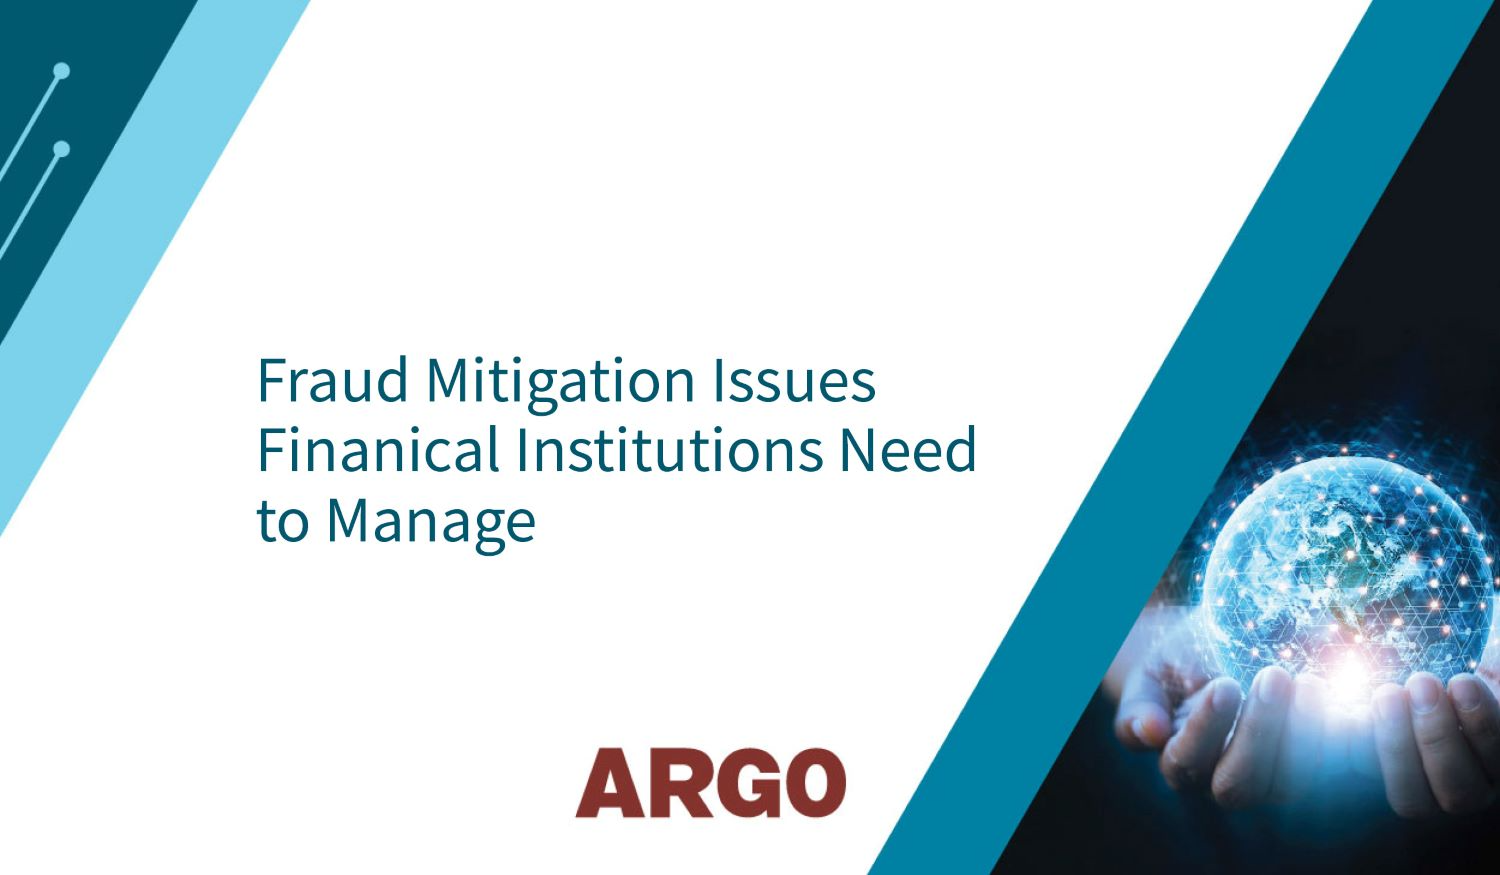 Fraud Mitigation Issues all Financial Institutions Need to Manage